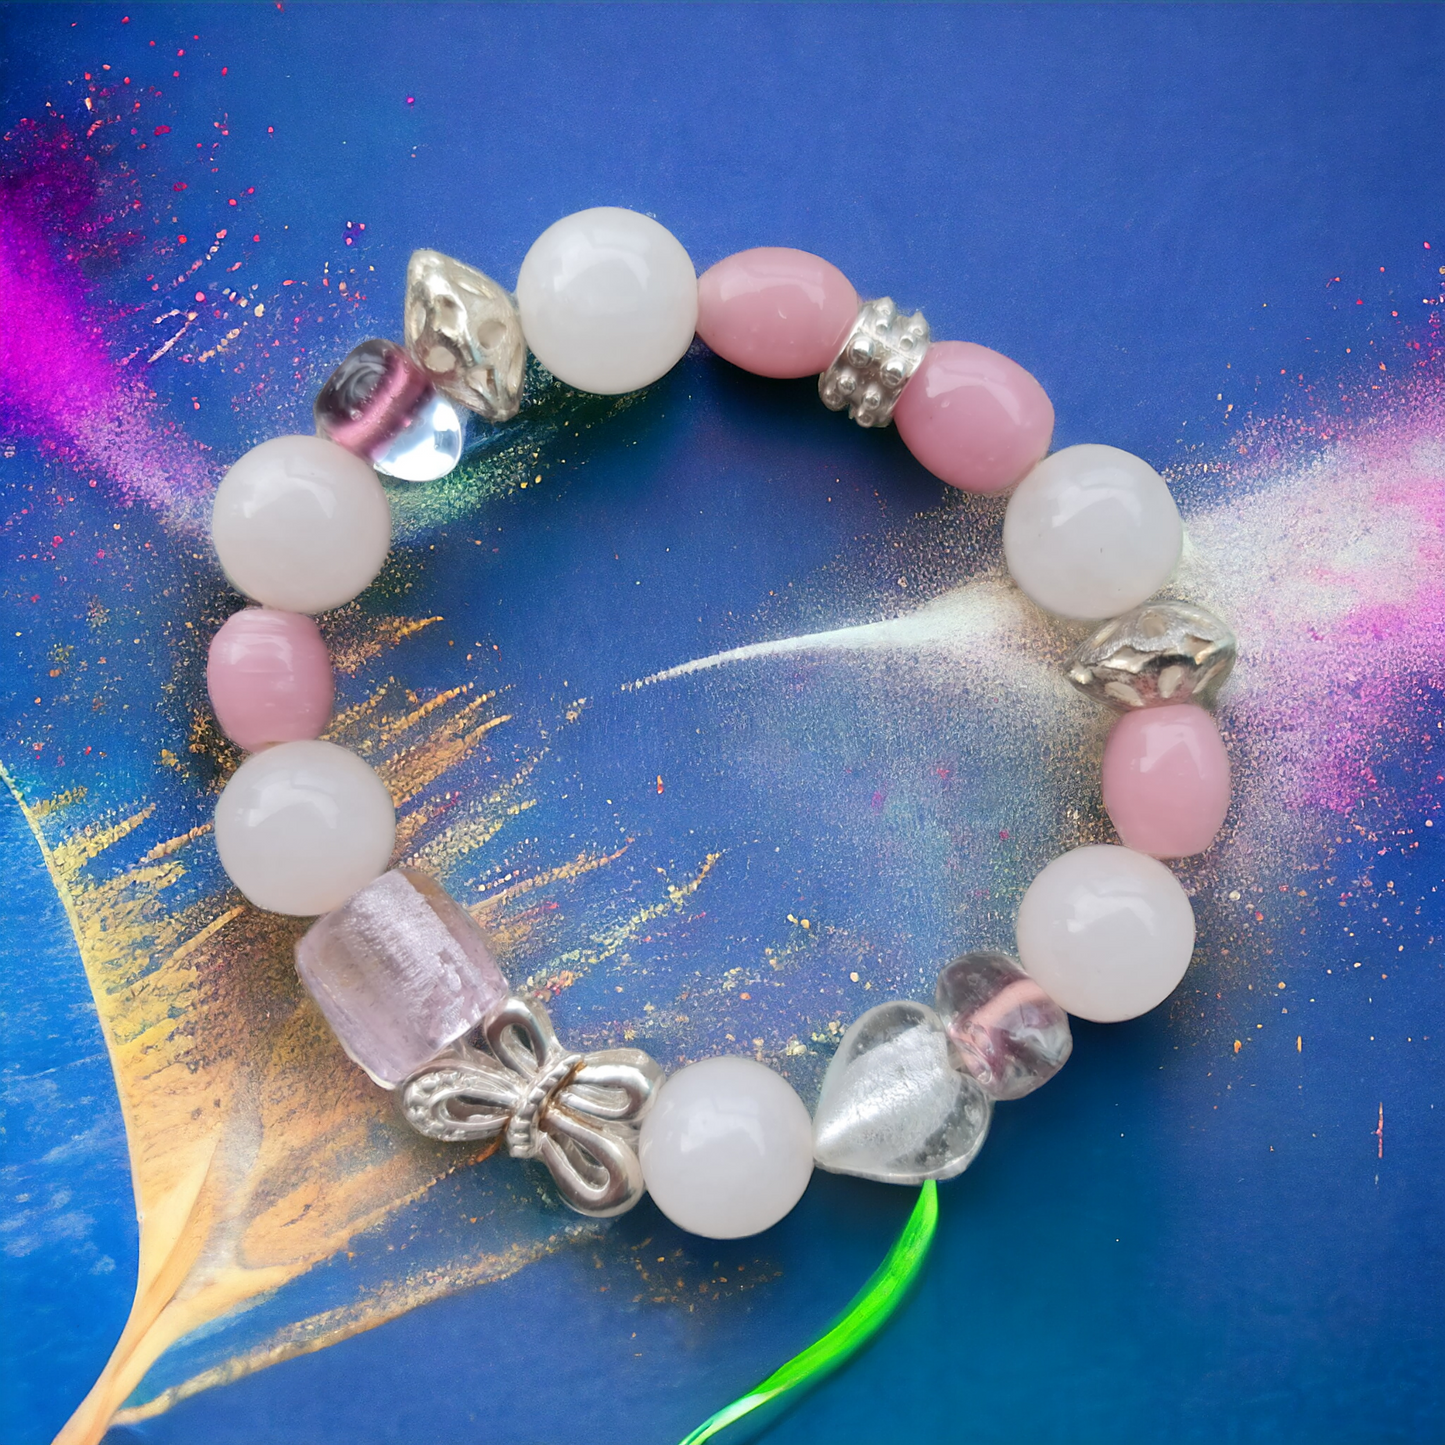 A Touch of Pink and Rose Quartz